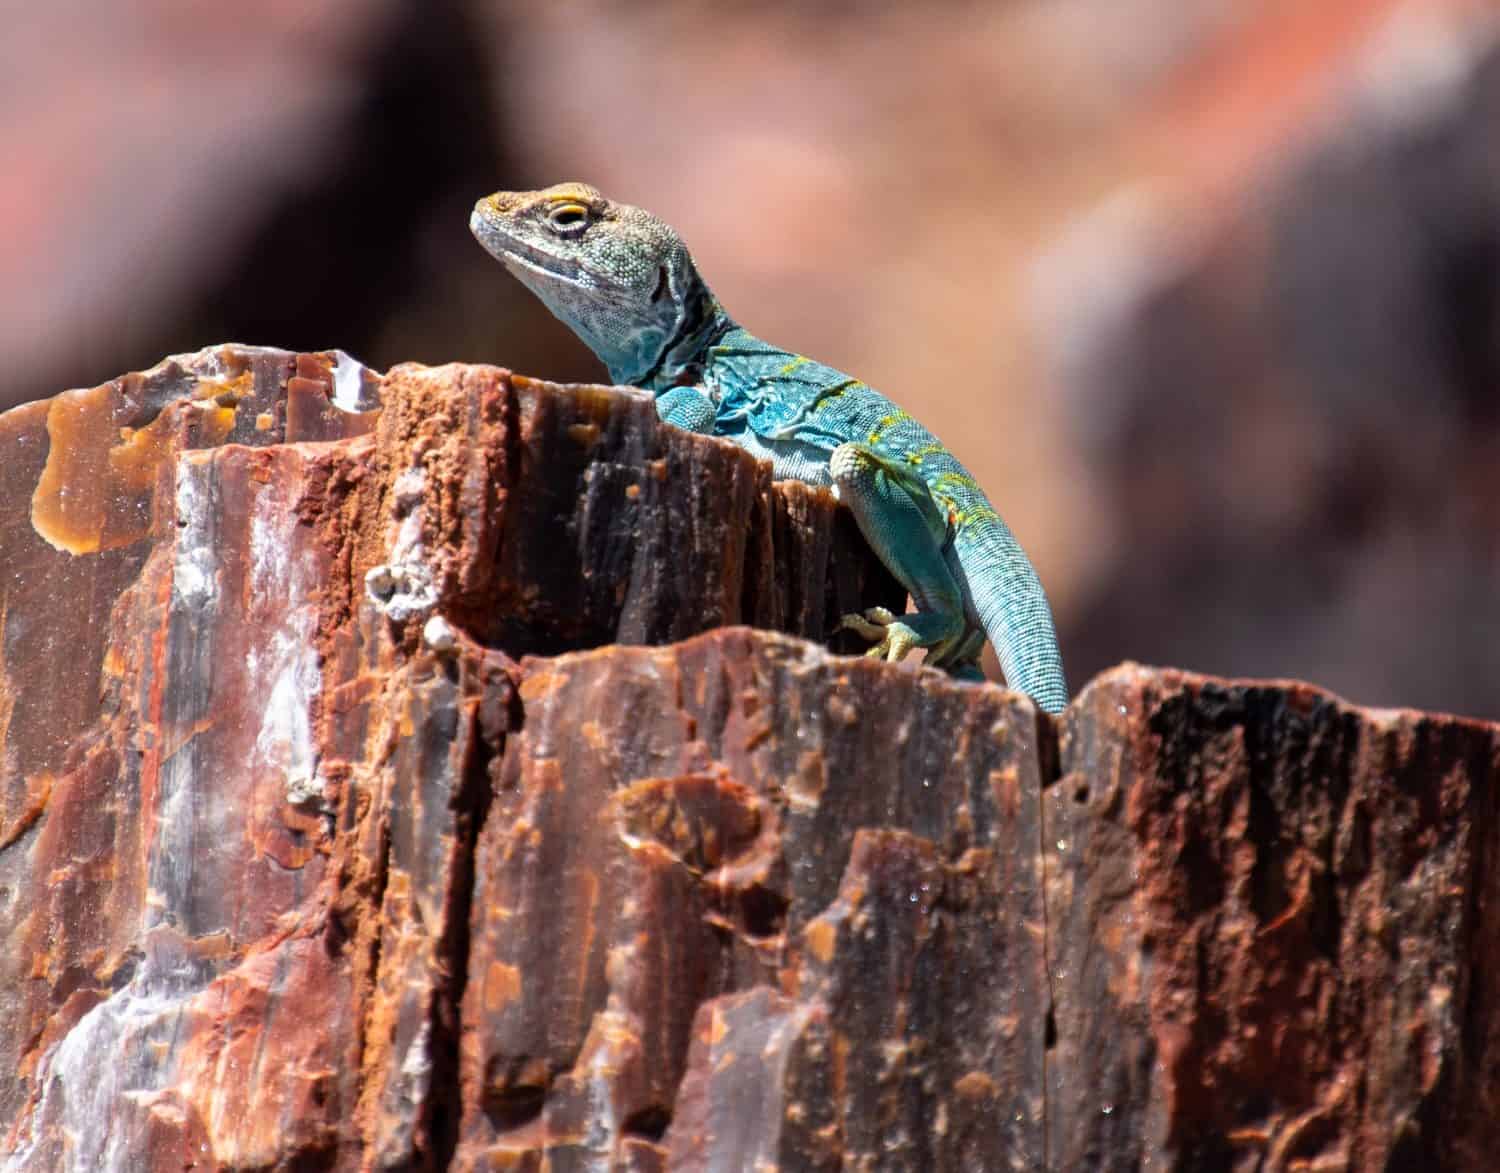 Beautiful collared lizard posing for me on a piece of petrified wood seen at the Petrified Forest National Park in Arizona.